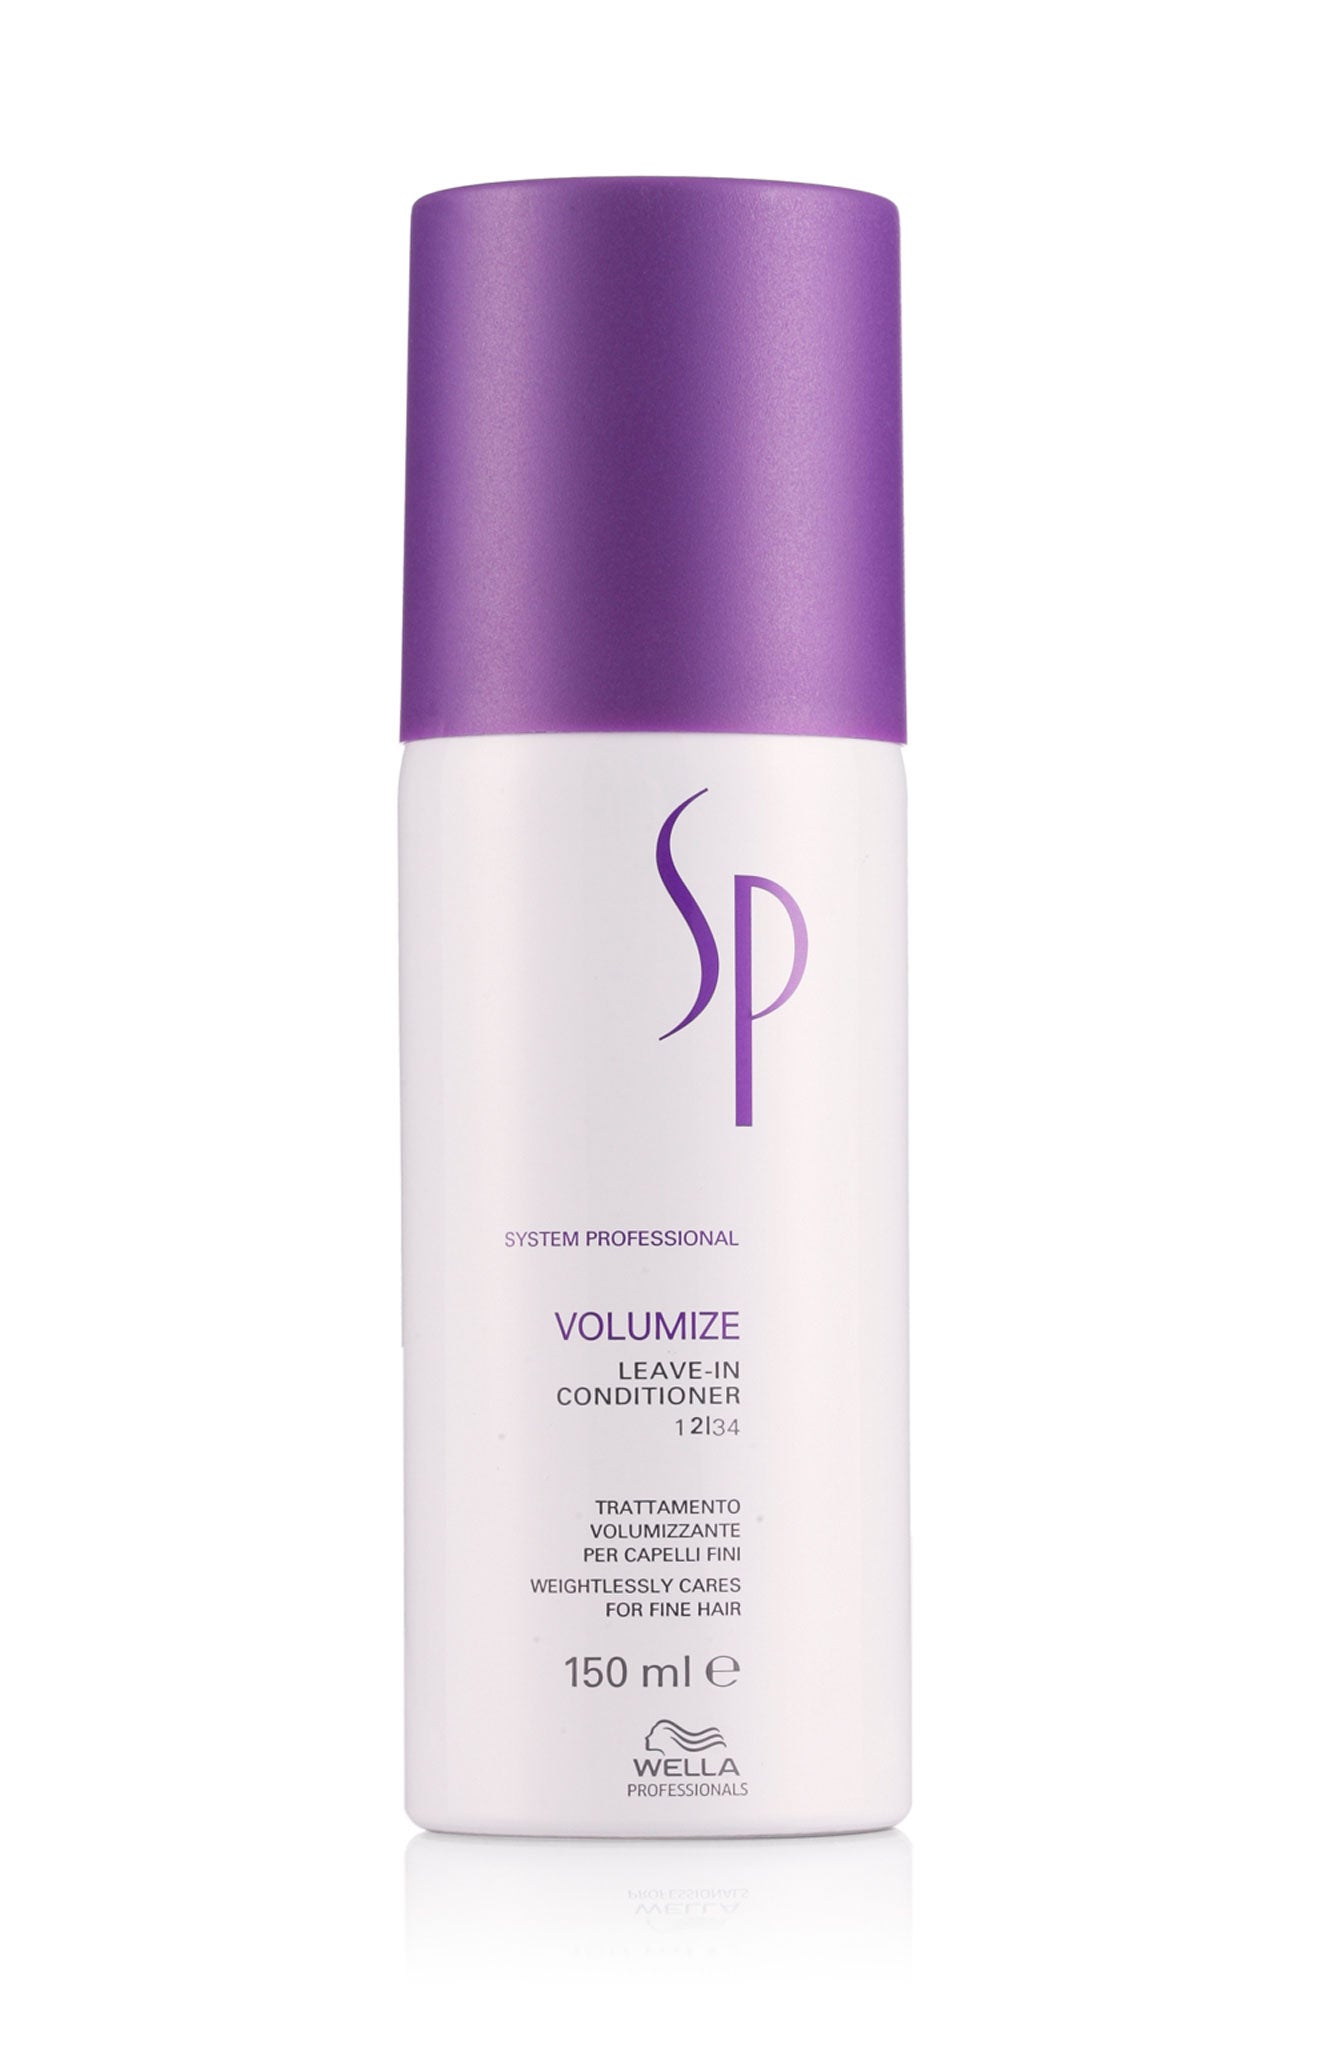 Volumize leave-in conditioner, Wella System Professional, £14.50, salons nationwide